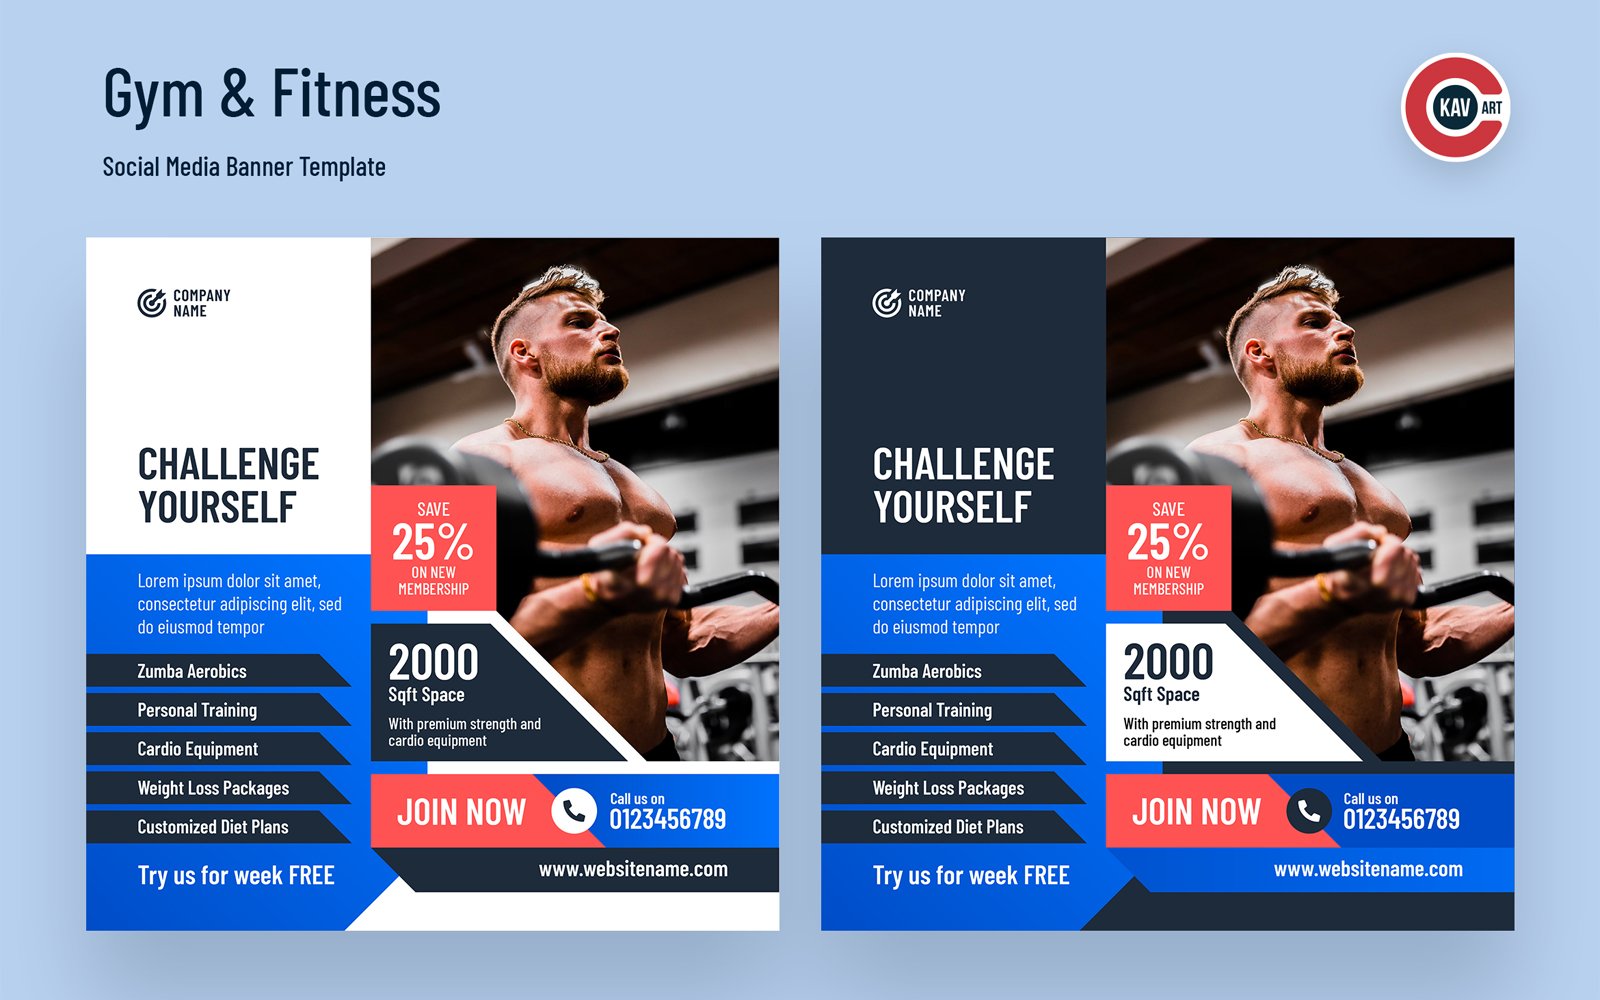 Gym and Fitness Social Media Banner Template - 00229